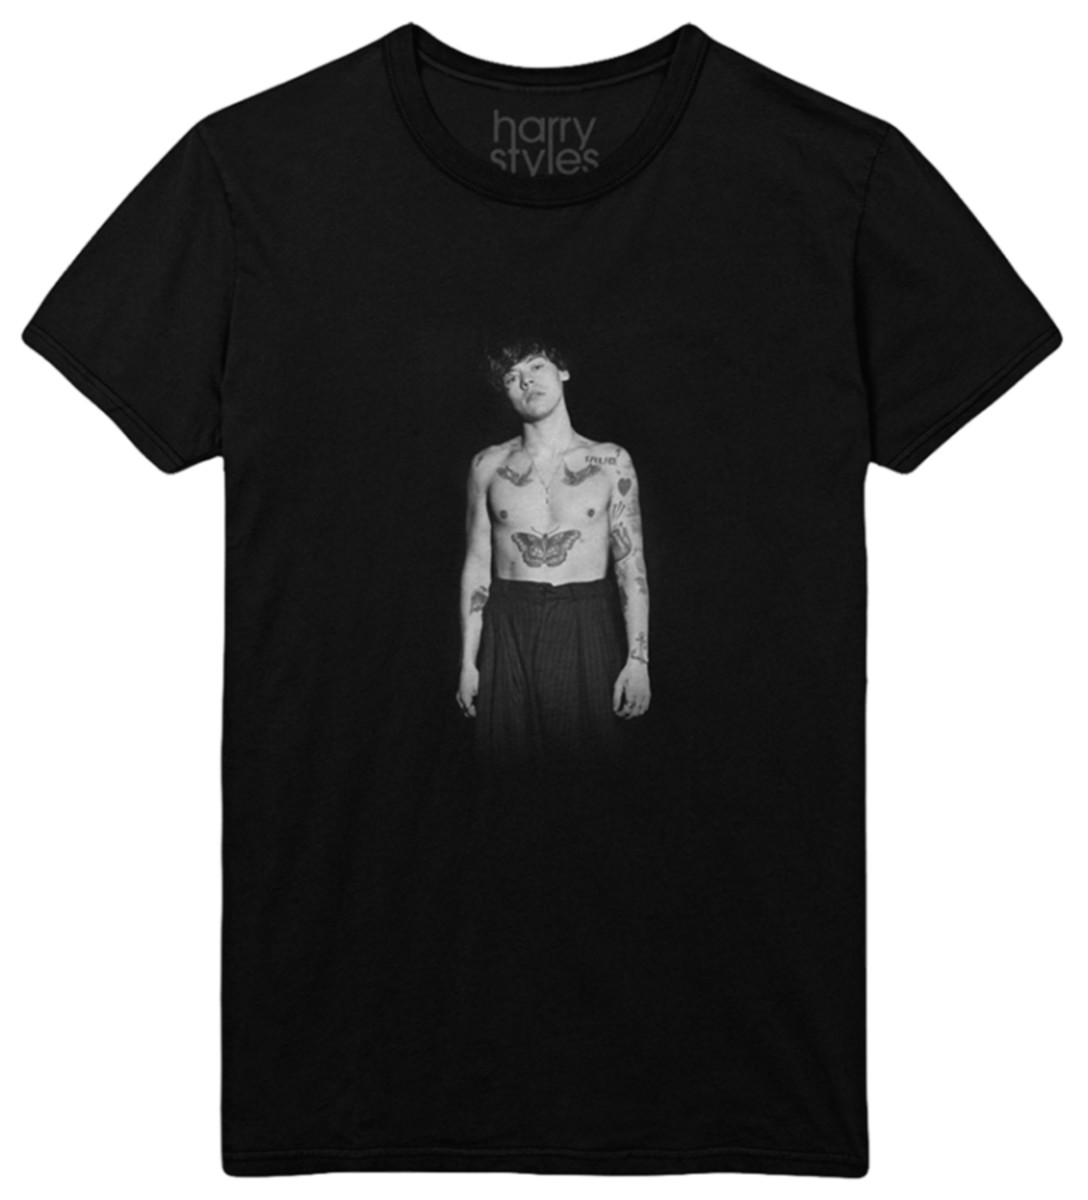 Photo Tee (Black), $34.95, available here.